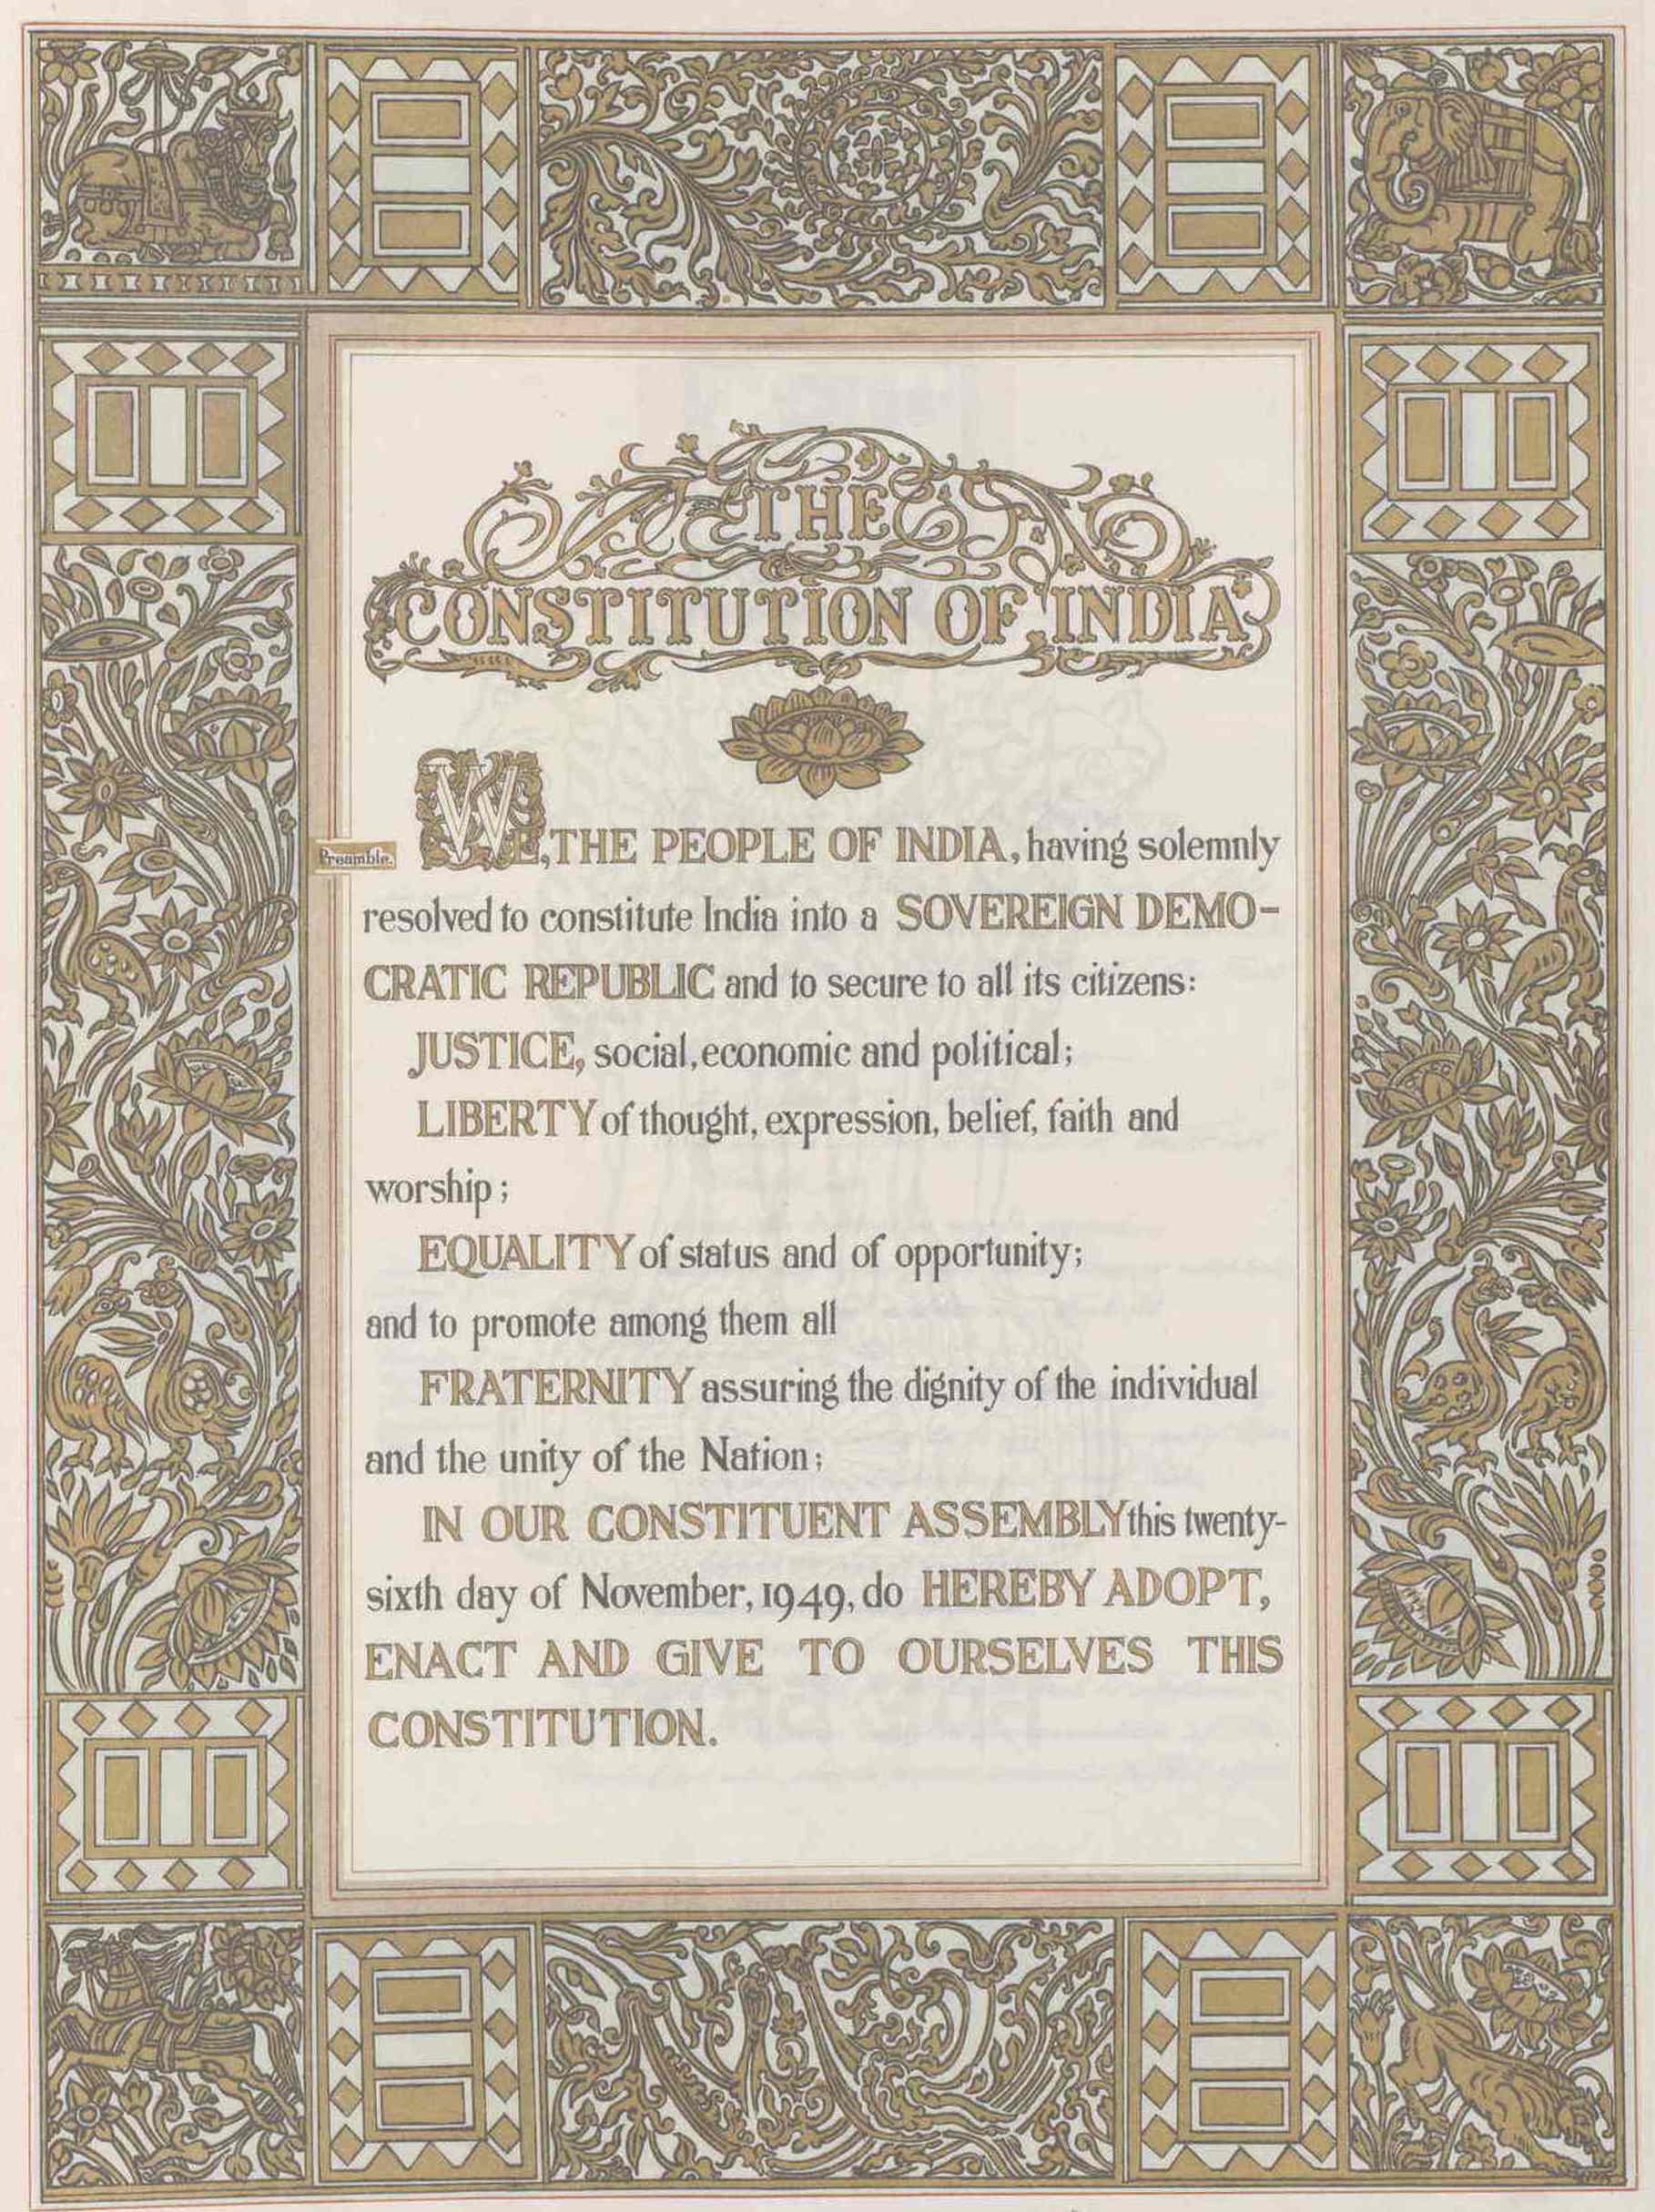 heritage-times-the-original-signatures-on-the-constitution-of-india